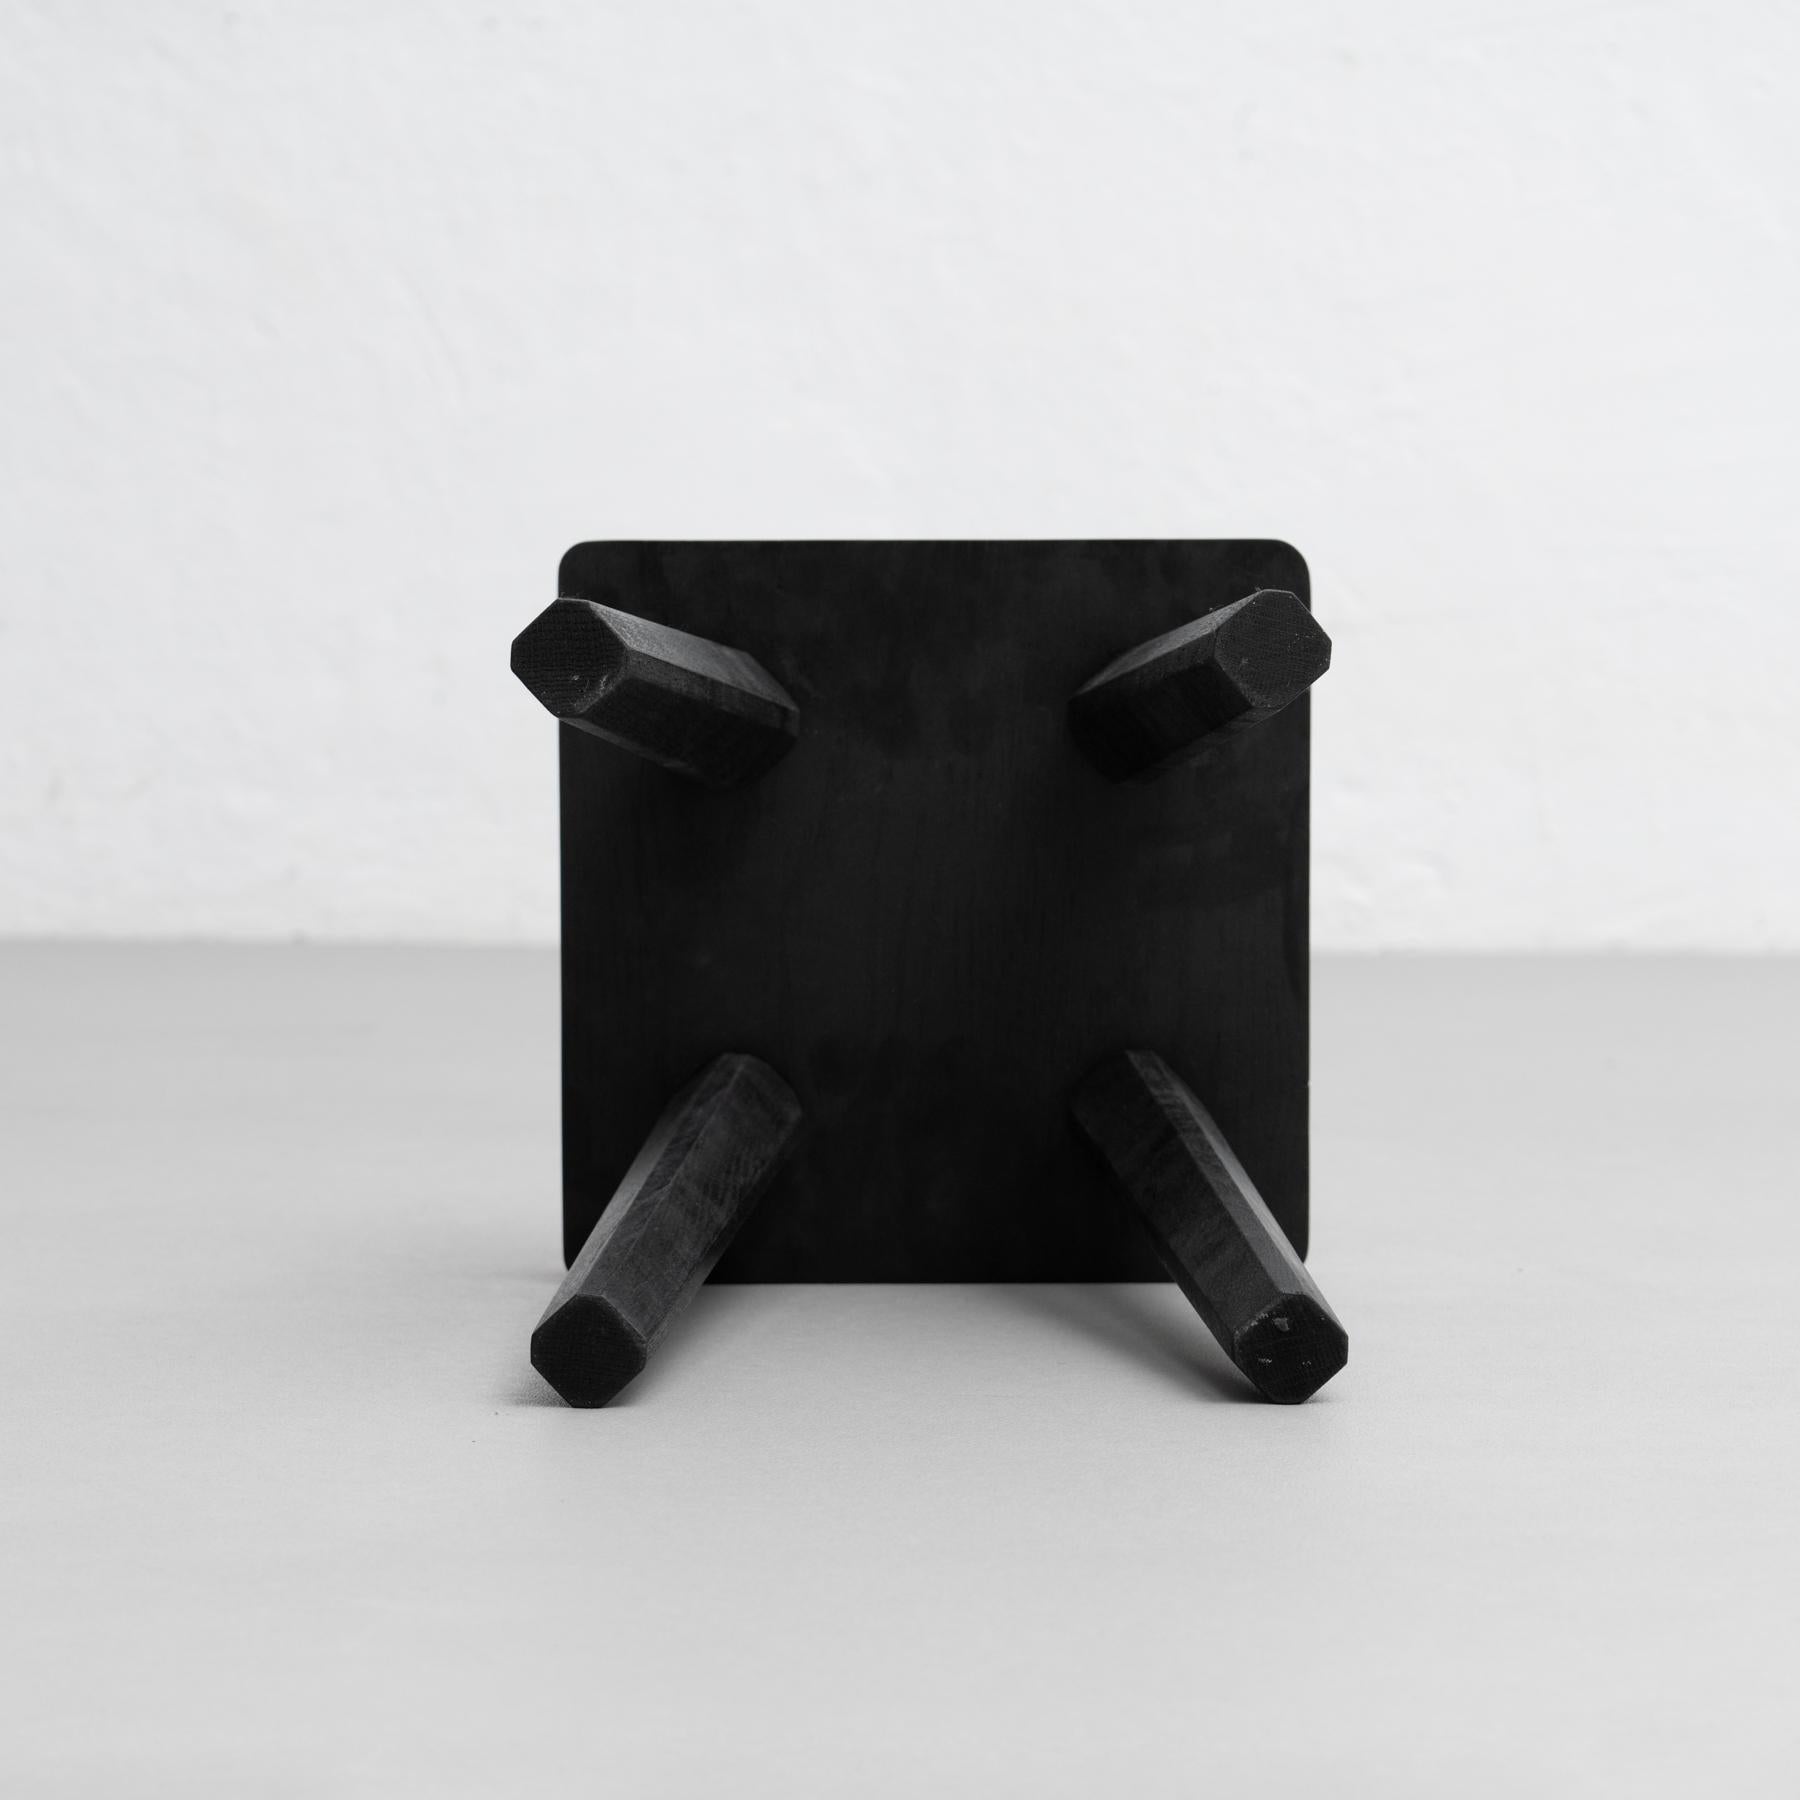 Pierre Chapo Special Black Wood Edition S01R Stool 1